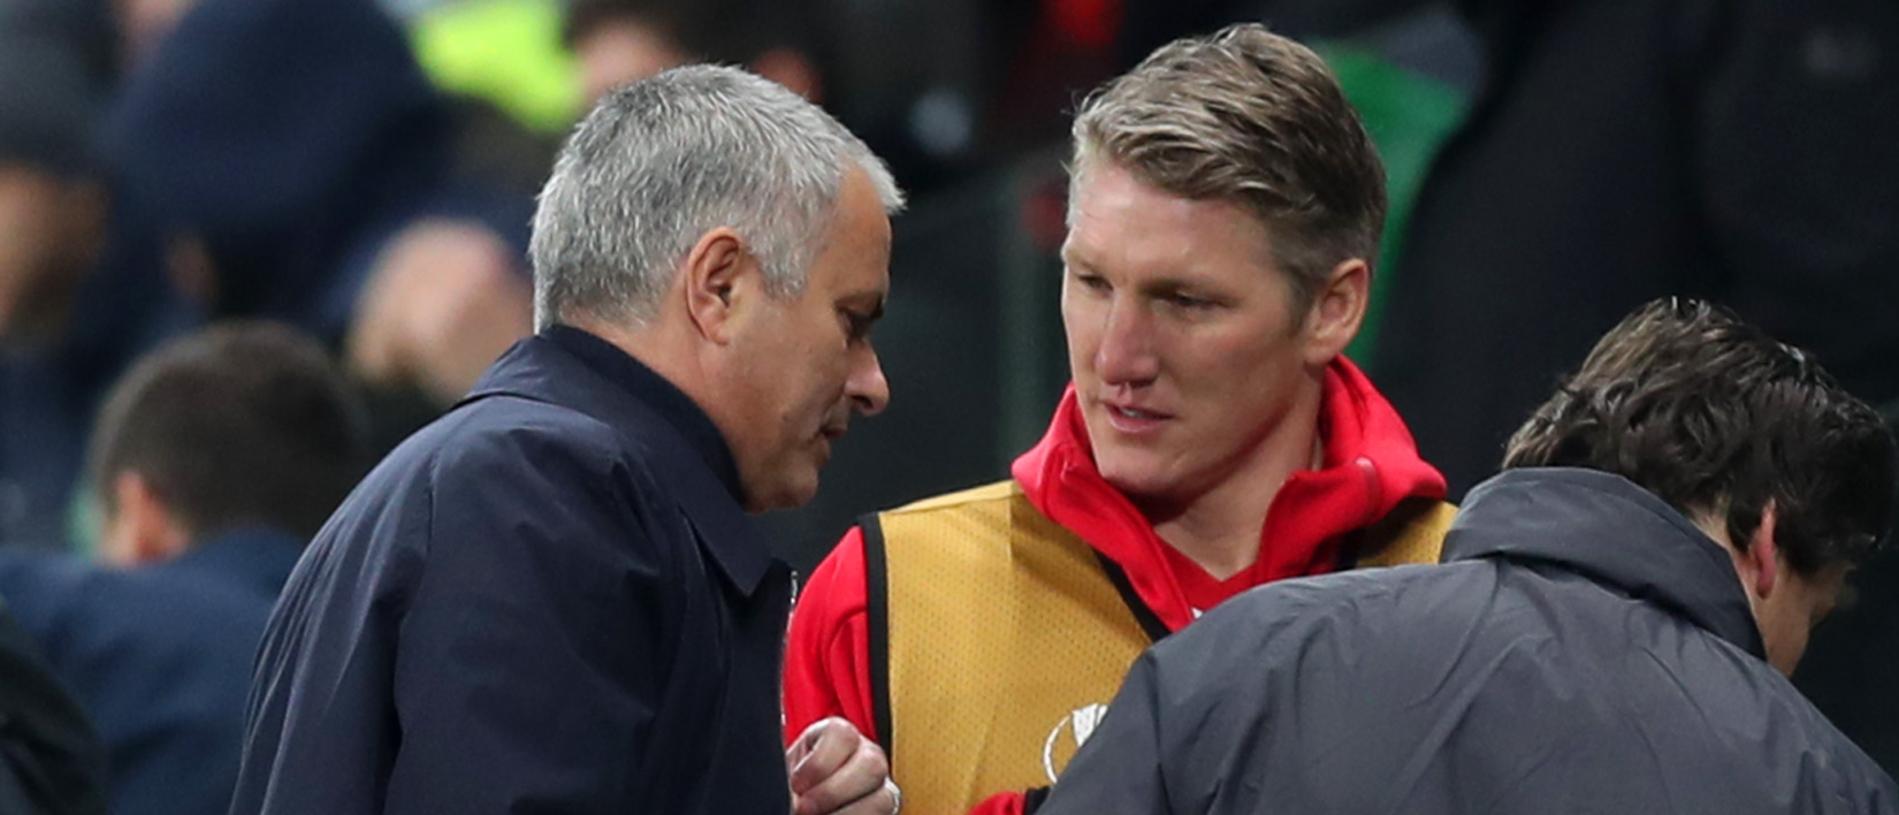 SAINT-ETIENNE, FRANCE - FEBRUARY 22: Bastian Schweinsteiger of Manchester United speaks with Jose Mourinho, manager of Manchester United on the touchline during the UEFA Europa League Round of 32 second leg match between AS Saint-Etienne and Manchester United at Stade Geoffroy-Guichard on February 22, 2017 in Saint-Etienne, France. (Photo by Christopher Lee/Getty Images)